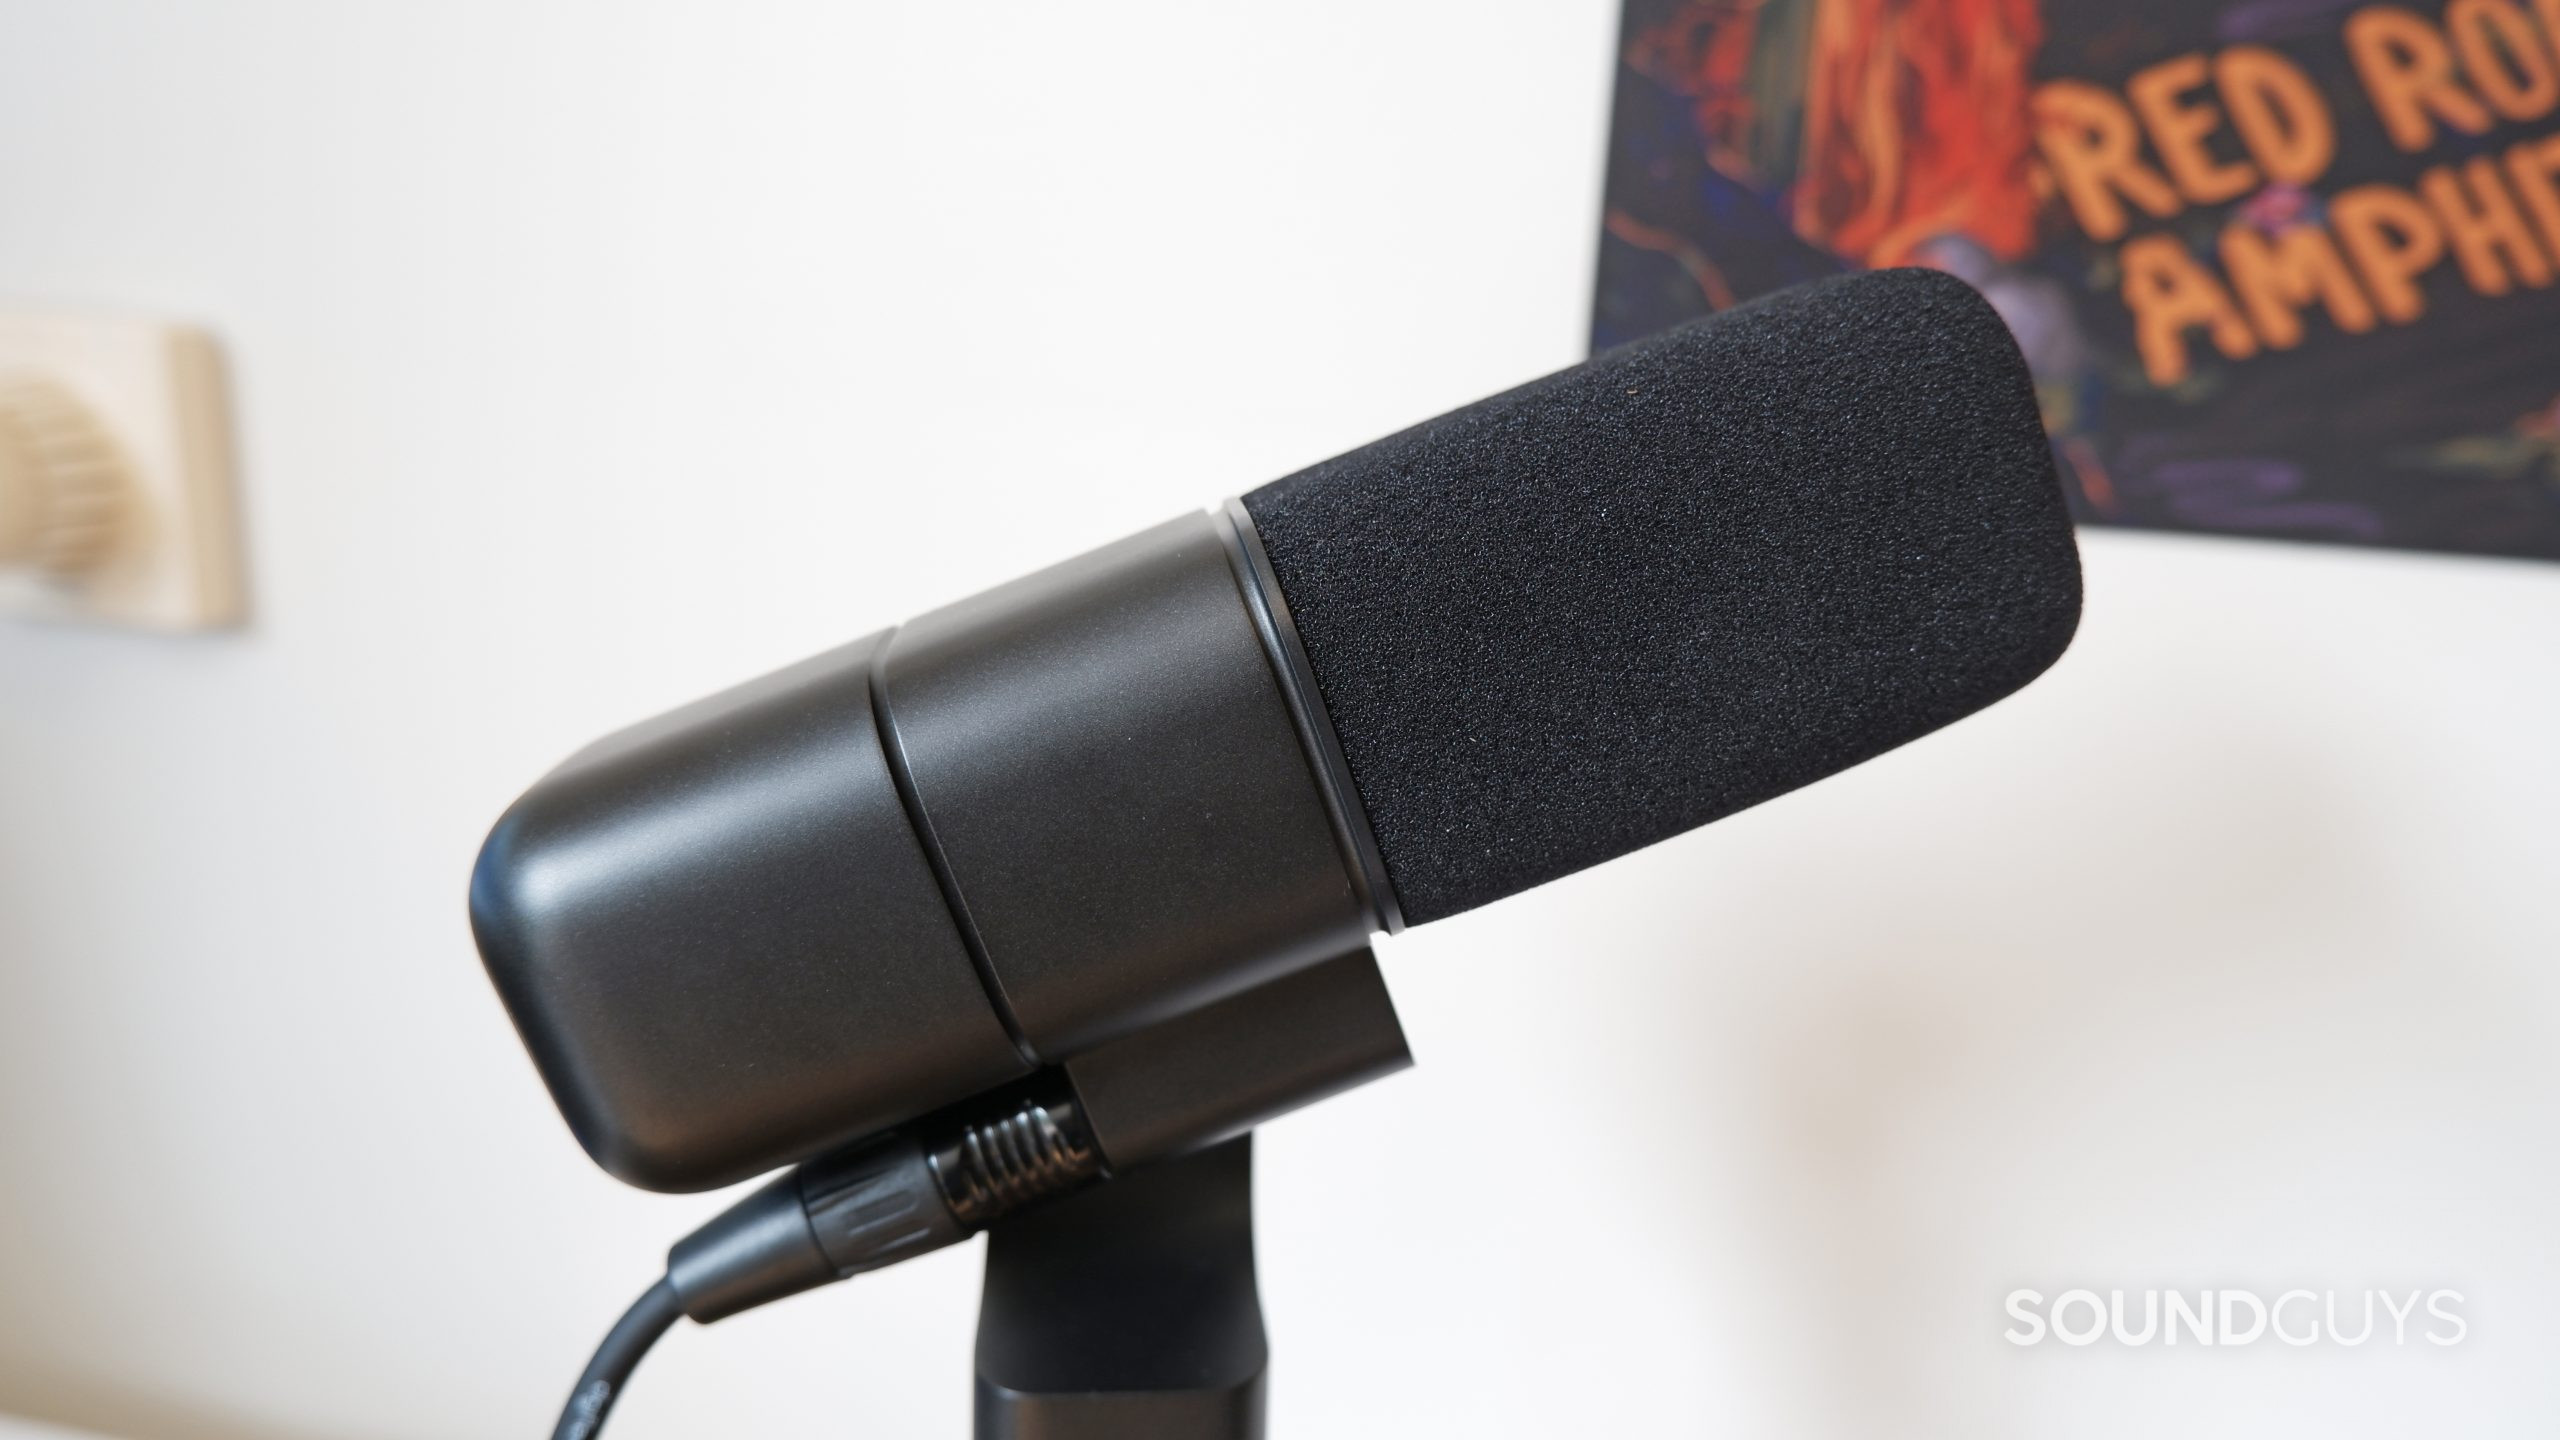 The Logitech Blue Sona XLR microphone mounted on a tripod in front of a white wall.